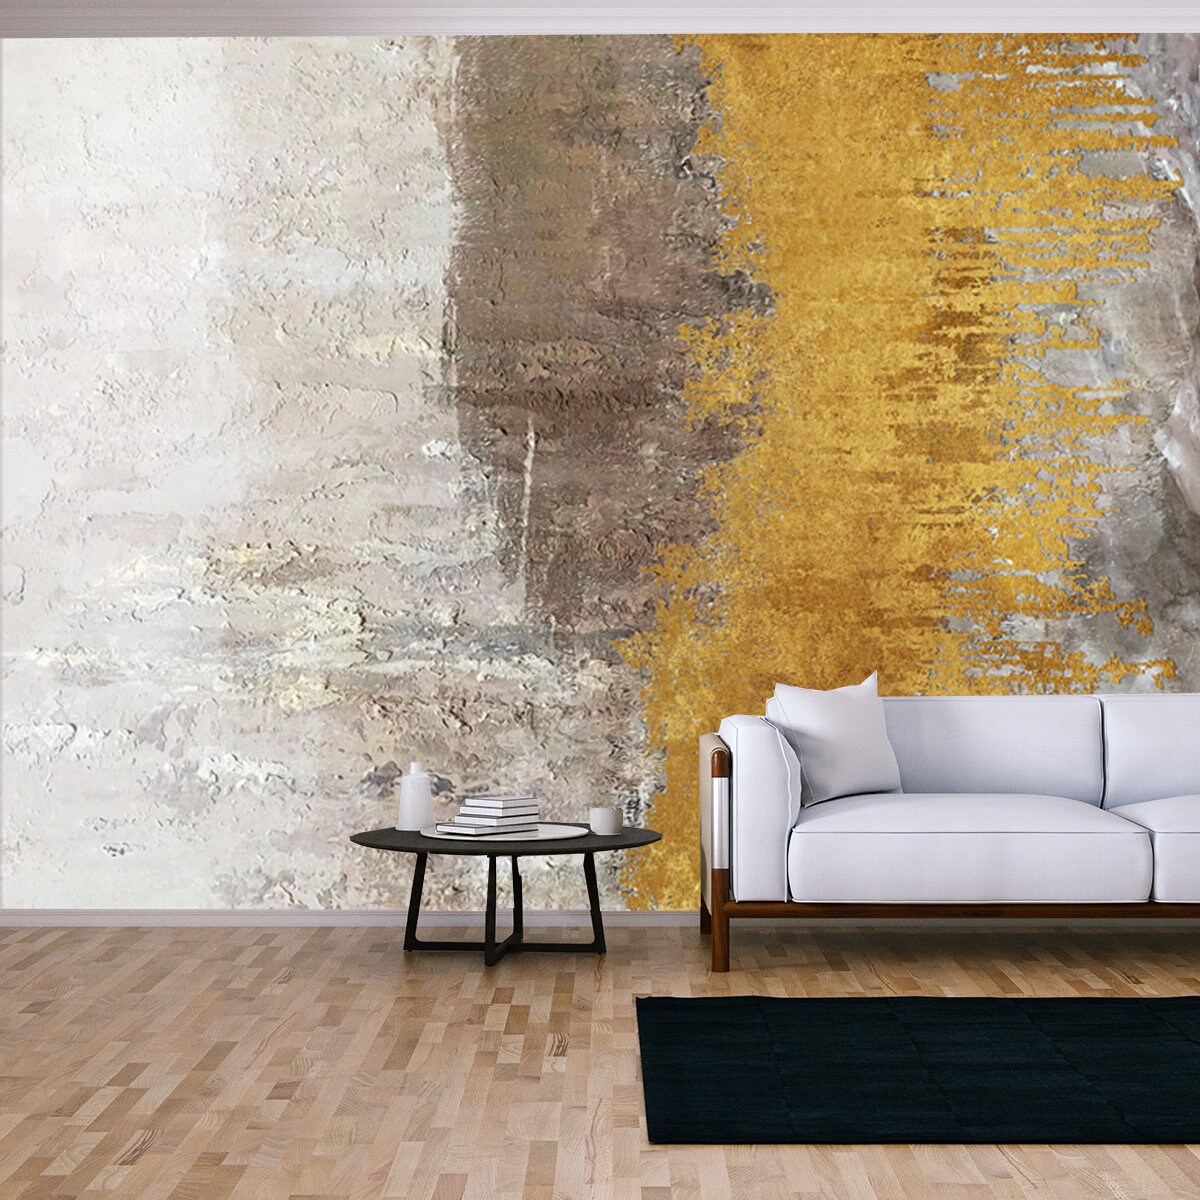 Modern Abstract Oil Painting Art Design. Orange, Gold and Blue Colors Wallpaper Living Room Mural